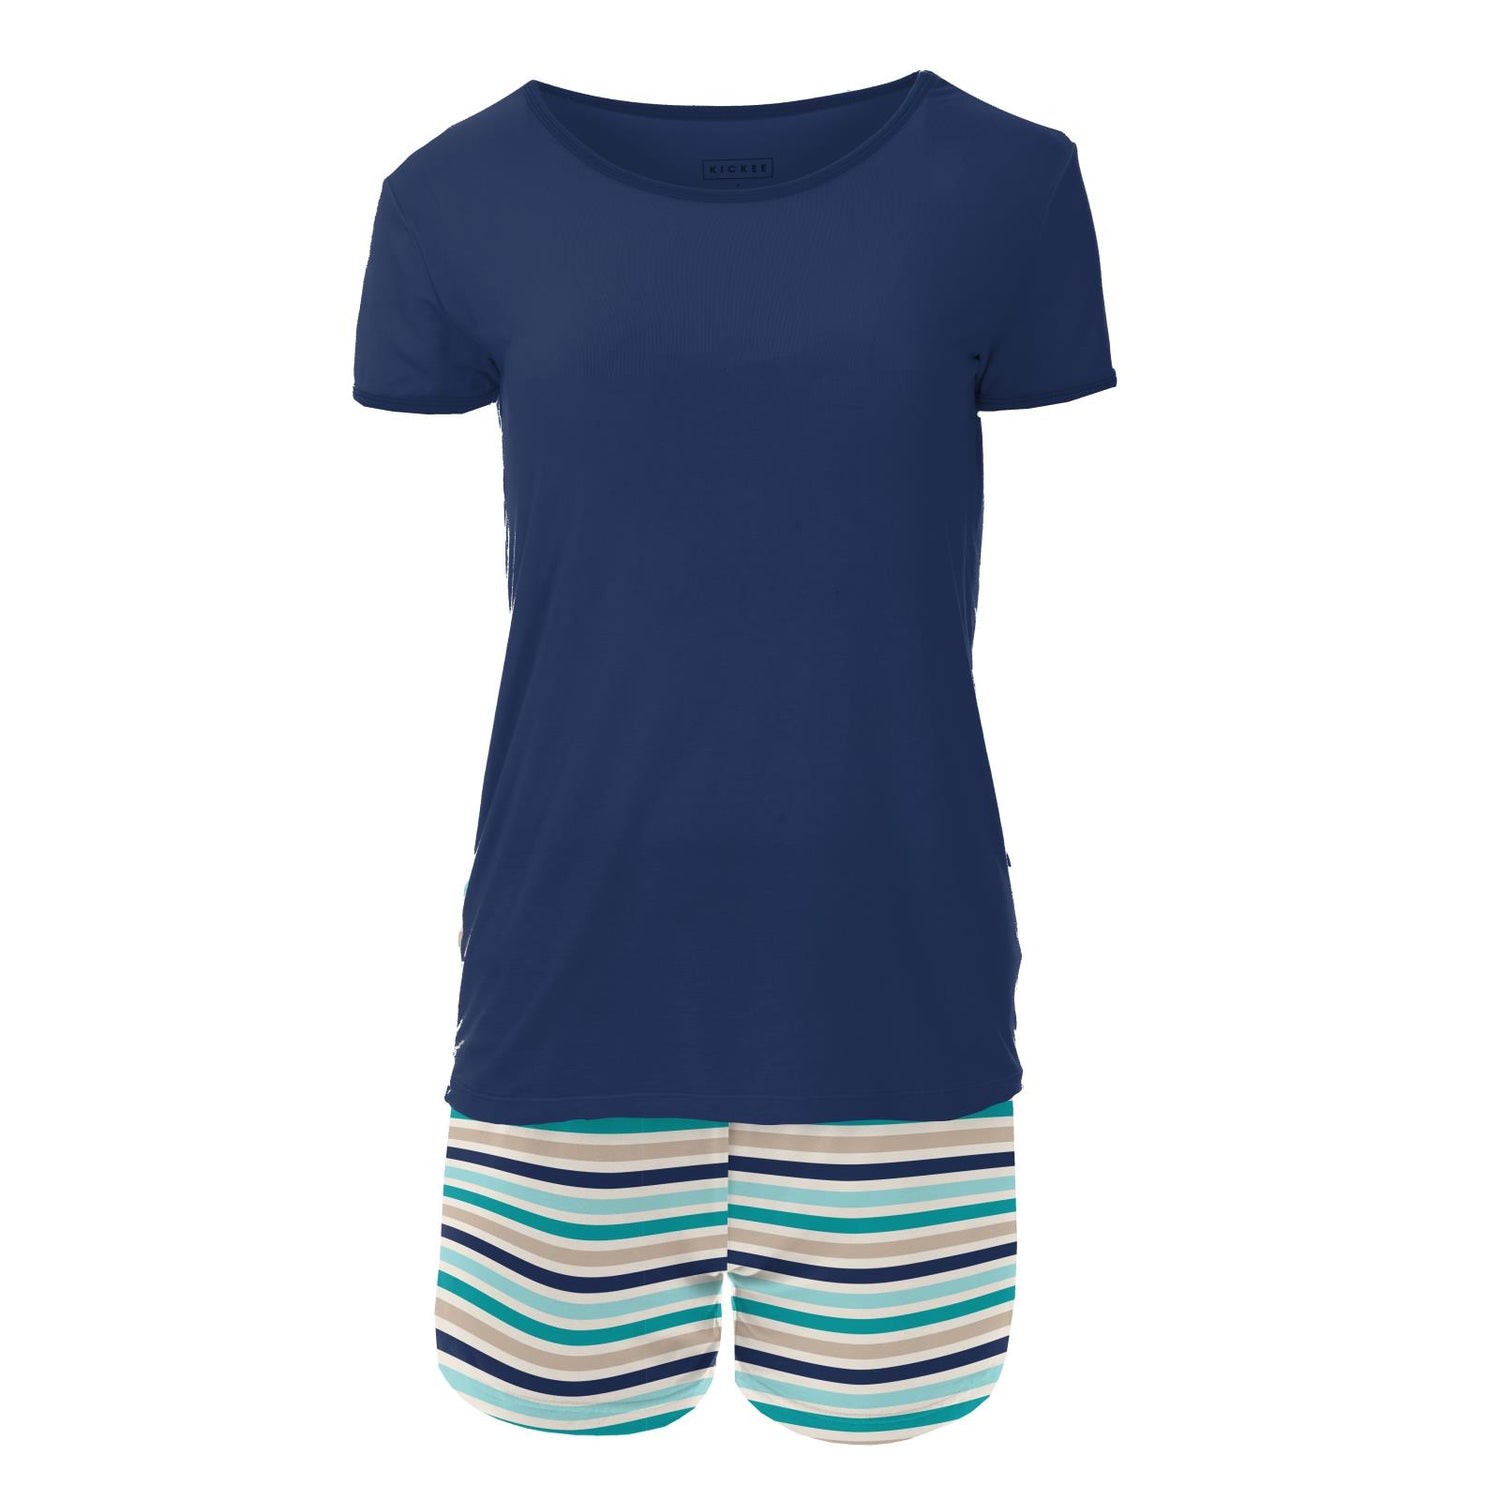 Women's Print Short Sleeve Fitted Pajama Set with Shorts in Sand and Sea Stripe